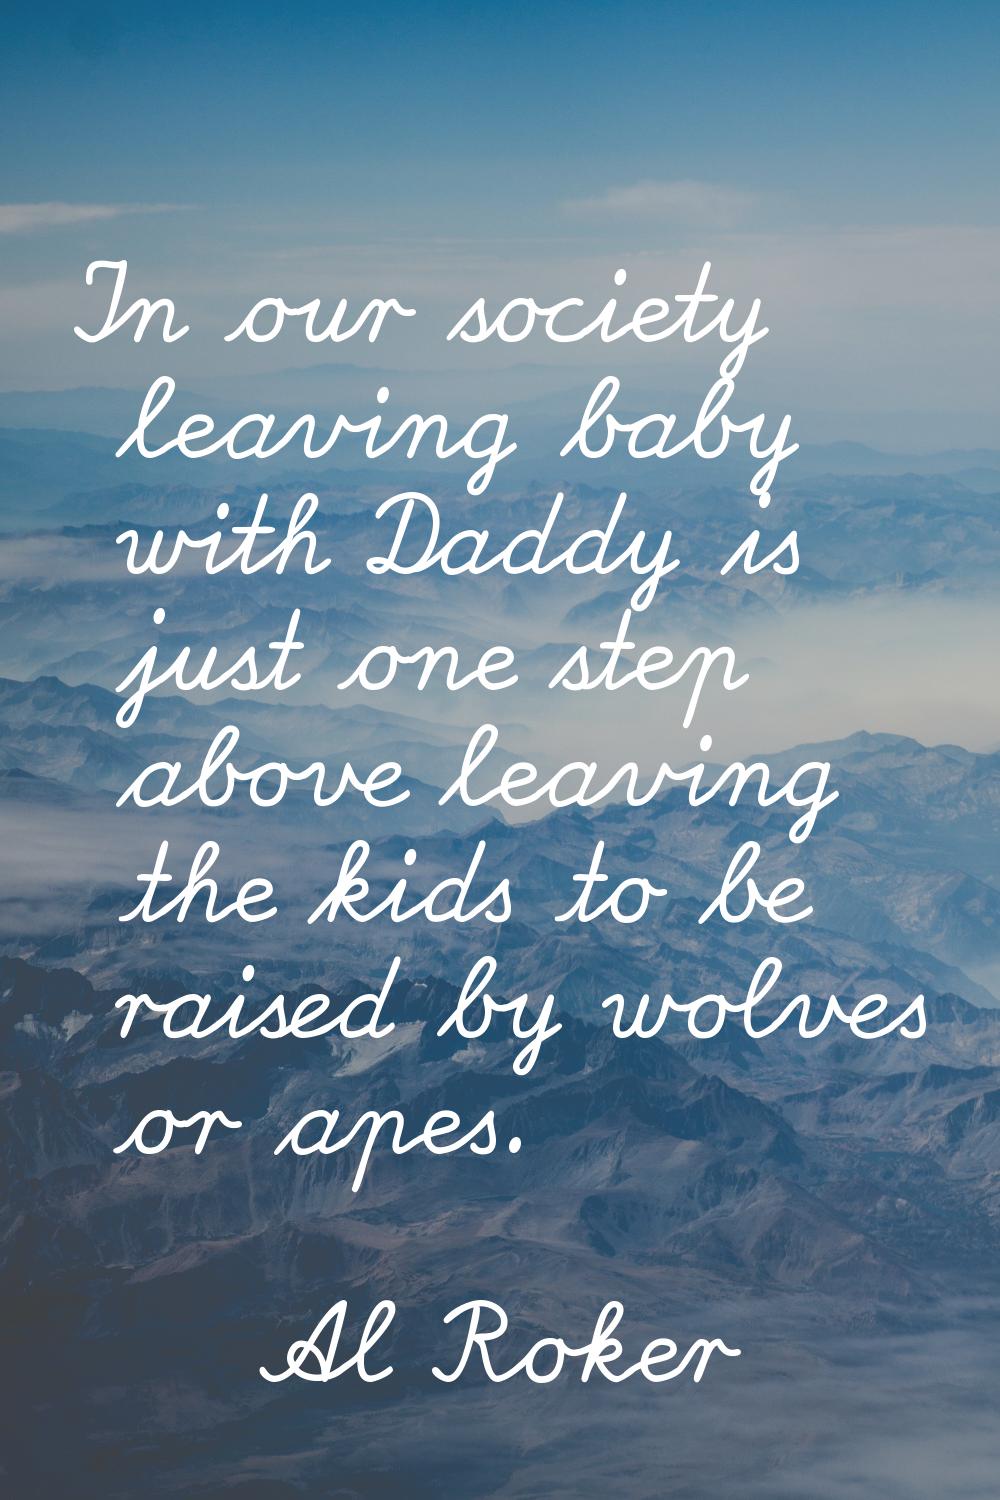 In our society leaving baby with Daddy is just one step above leaving the kids to be raised by wolv